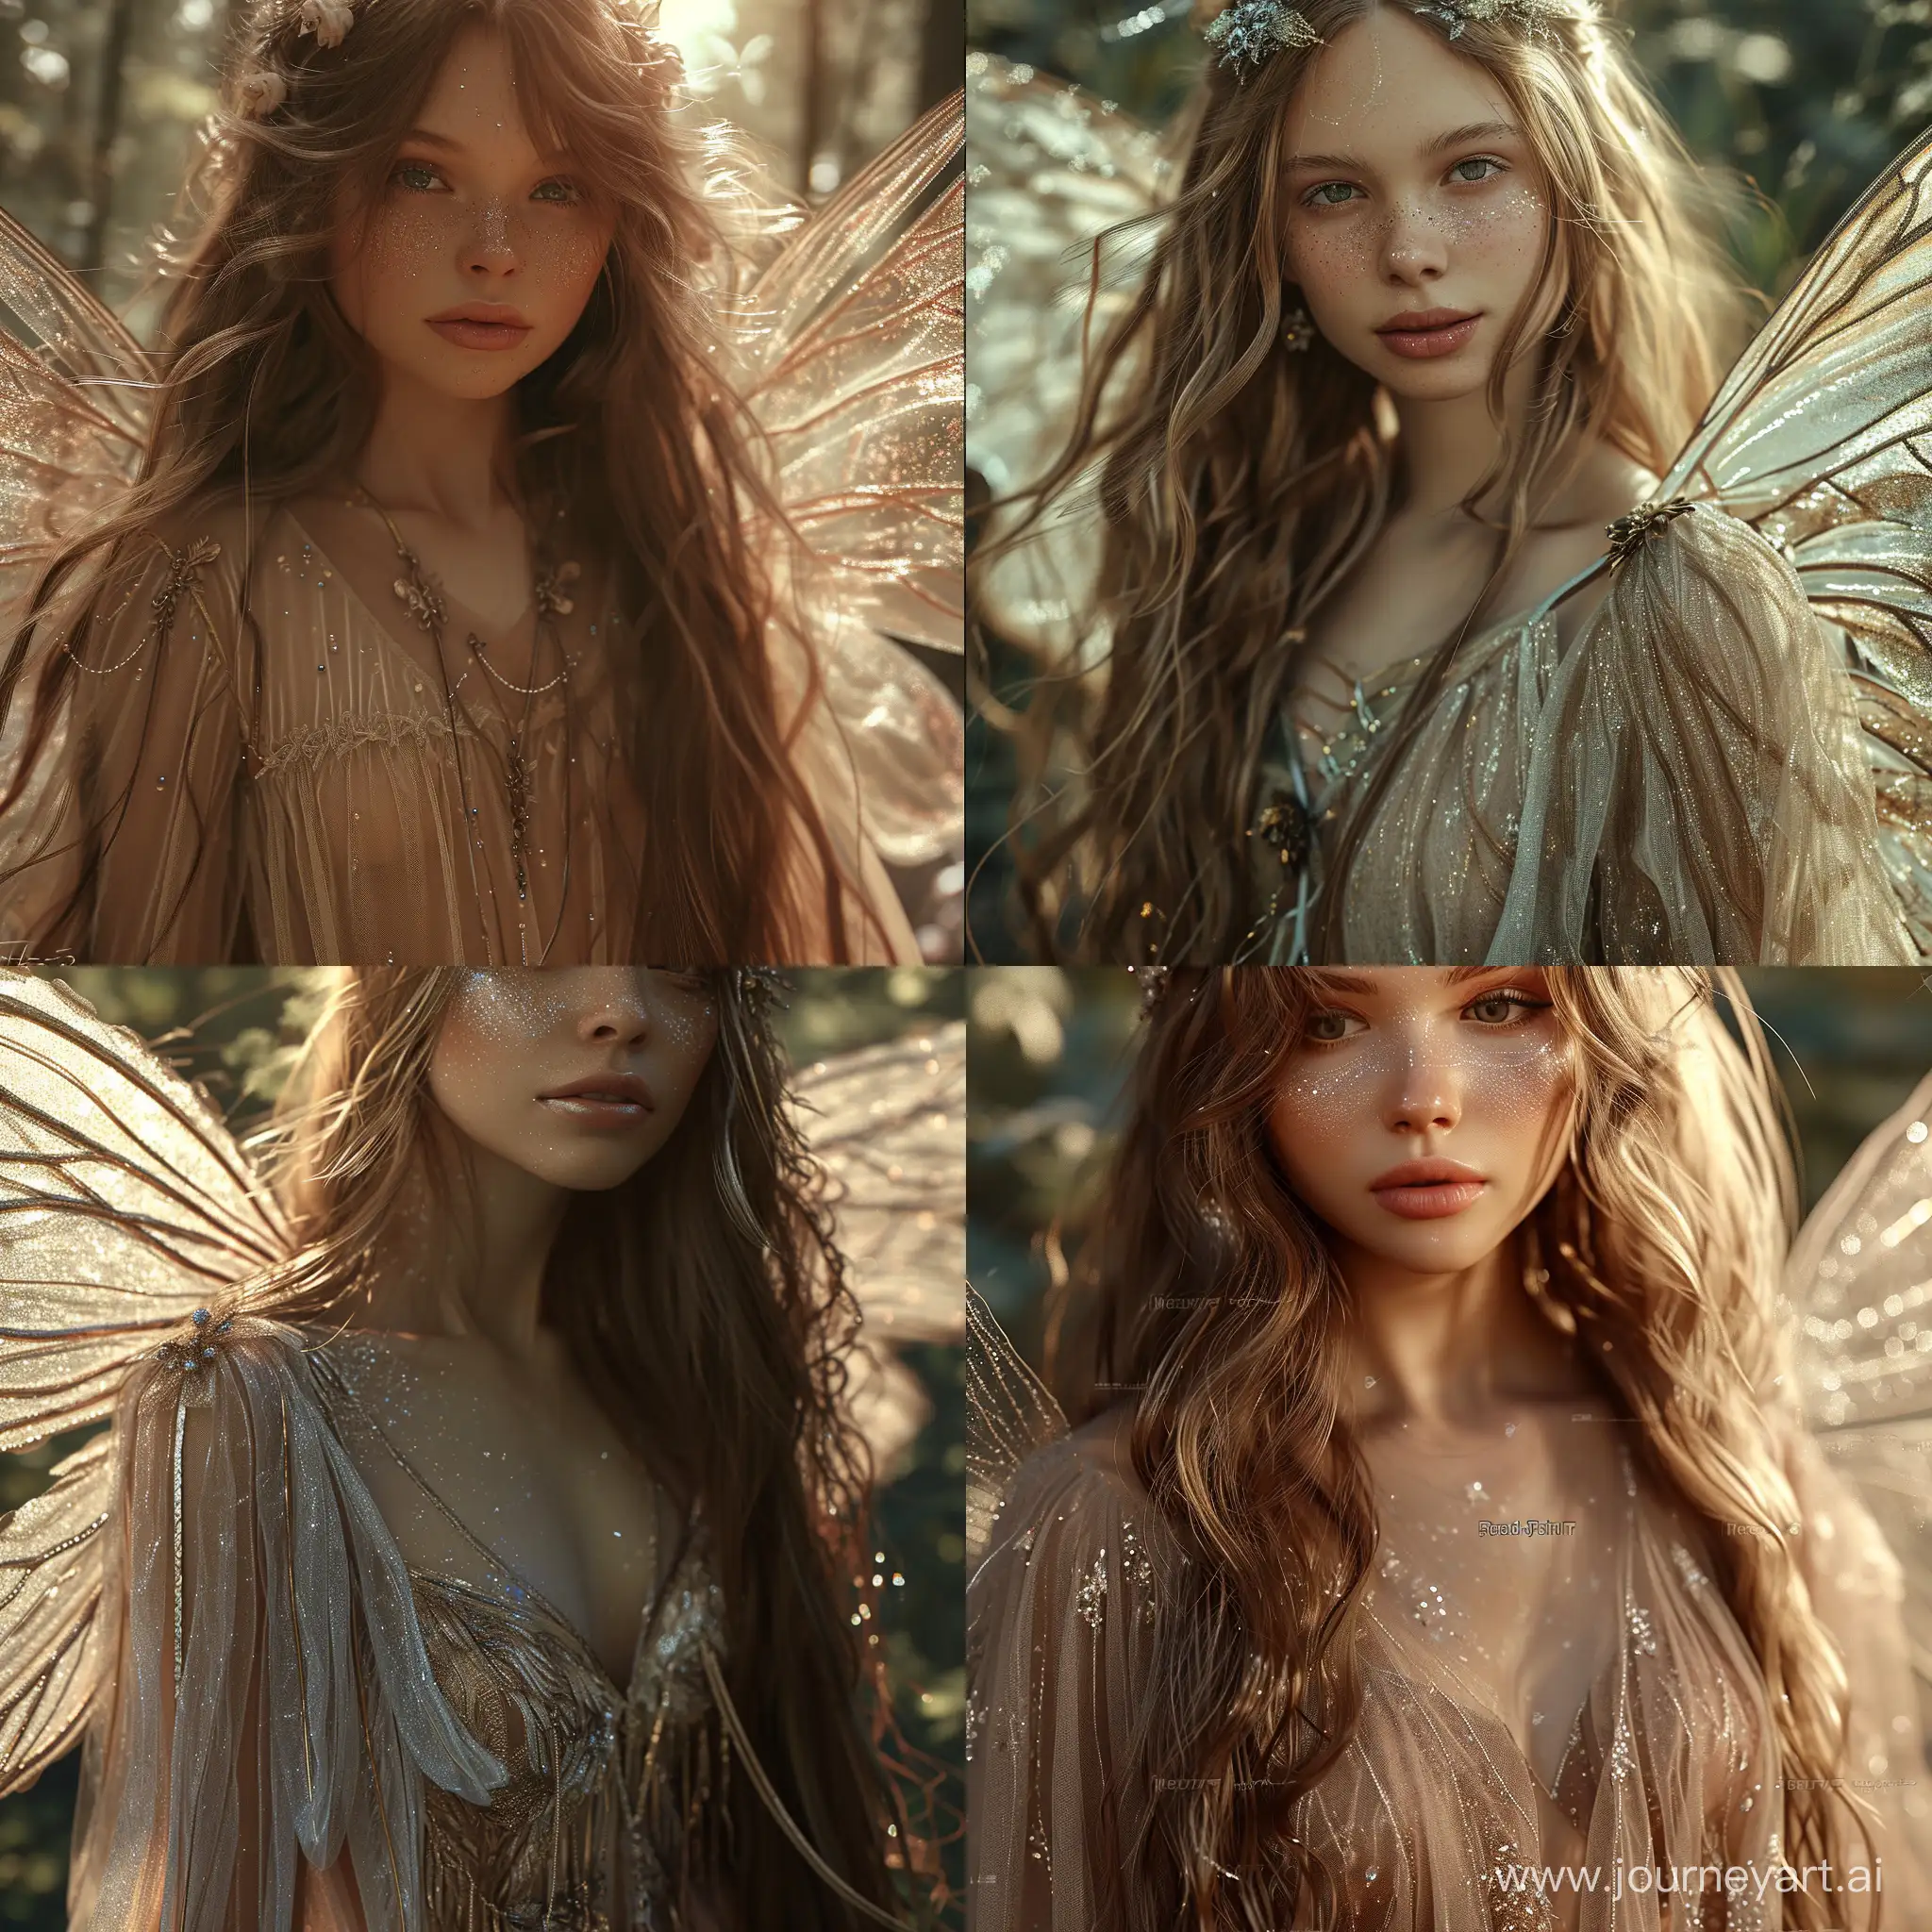 Enchanting-Fairy-in-Chiffon-Dress-with-Shining-Wings-Magical-Forest-Fantasy